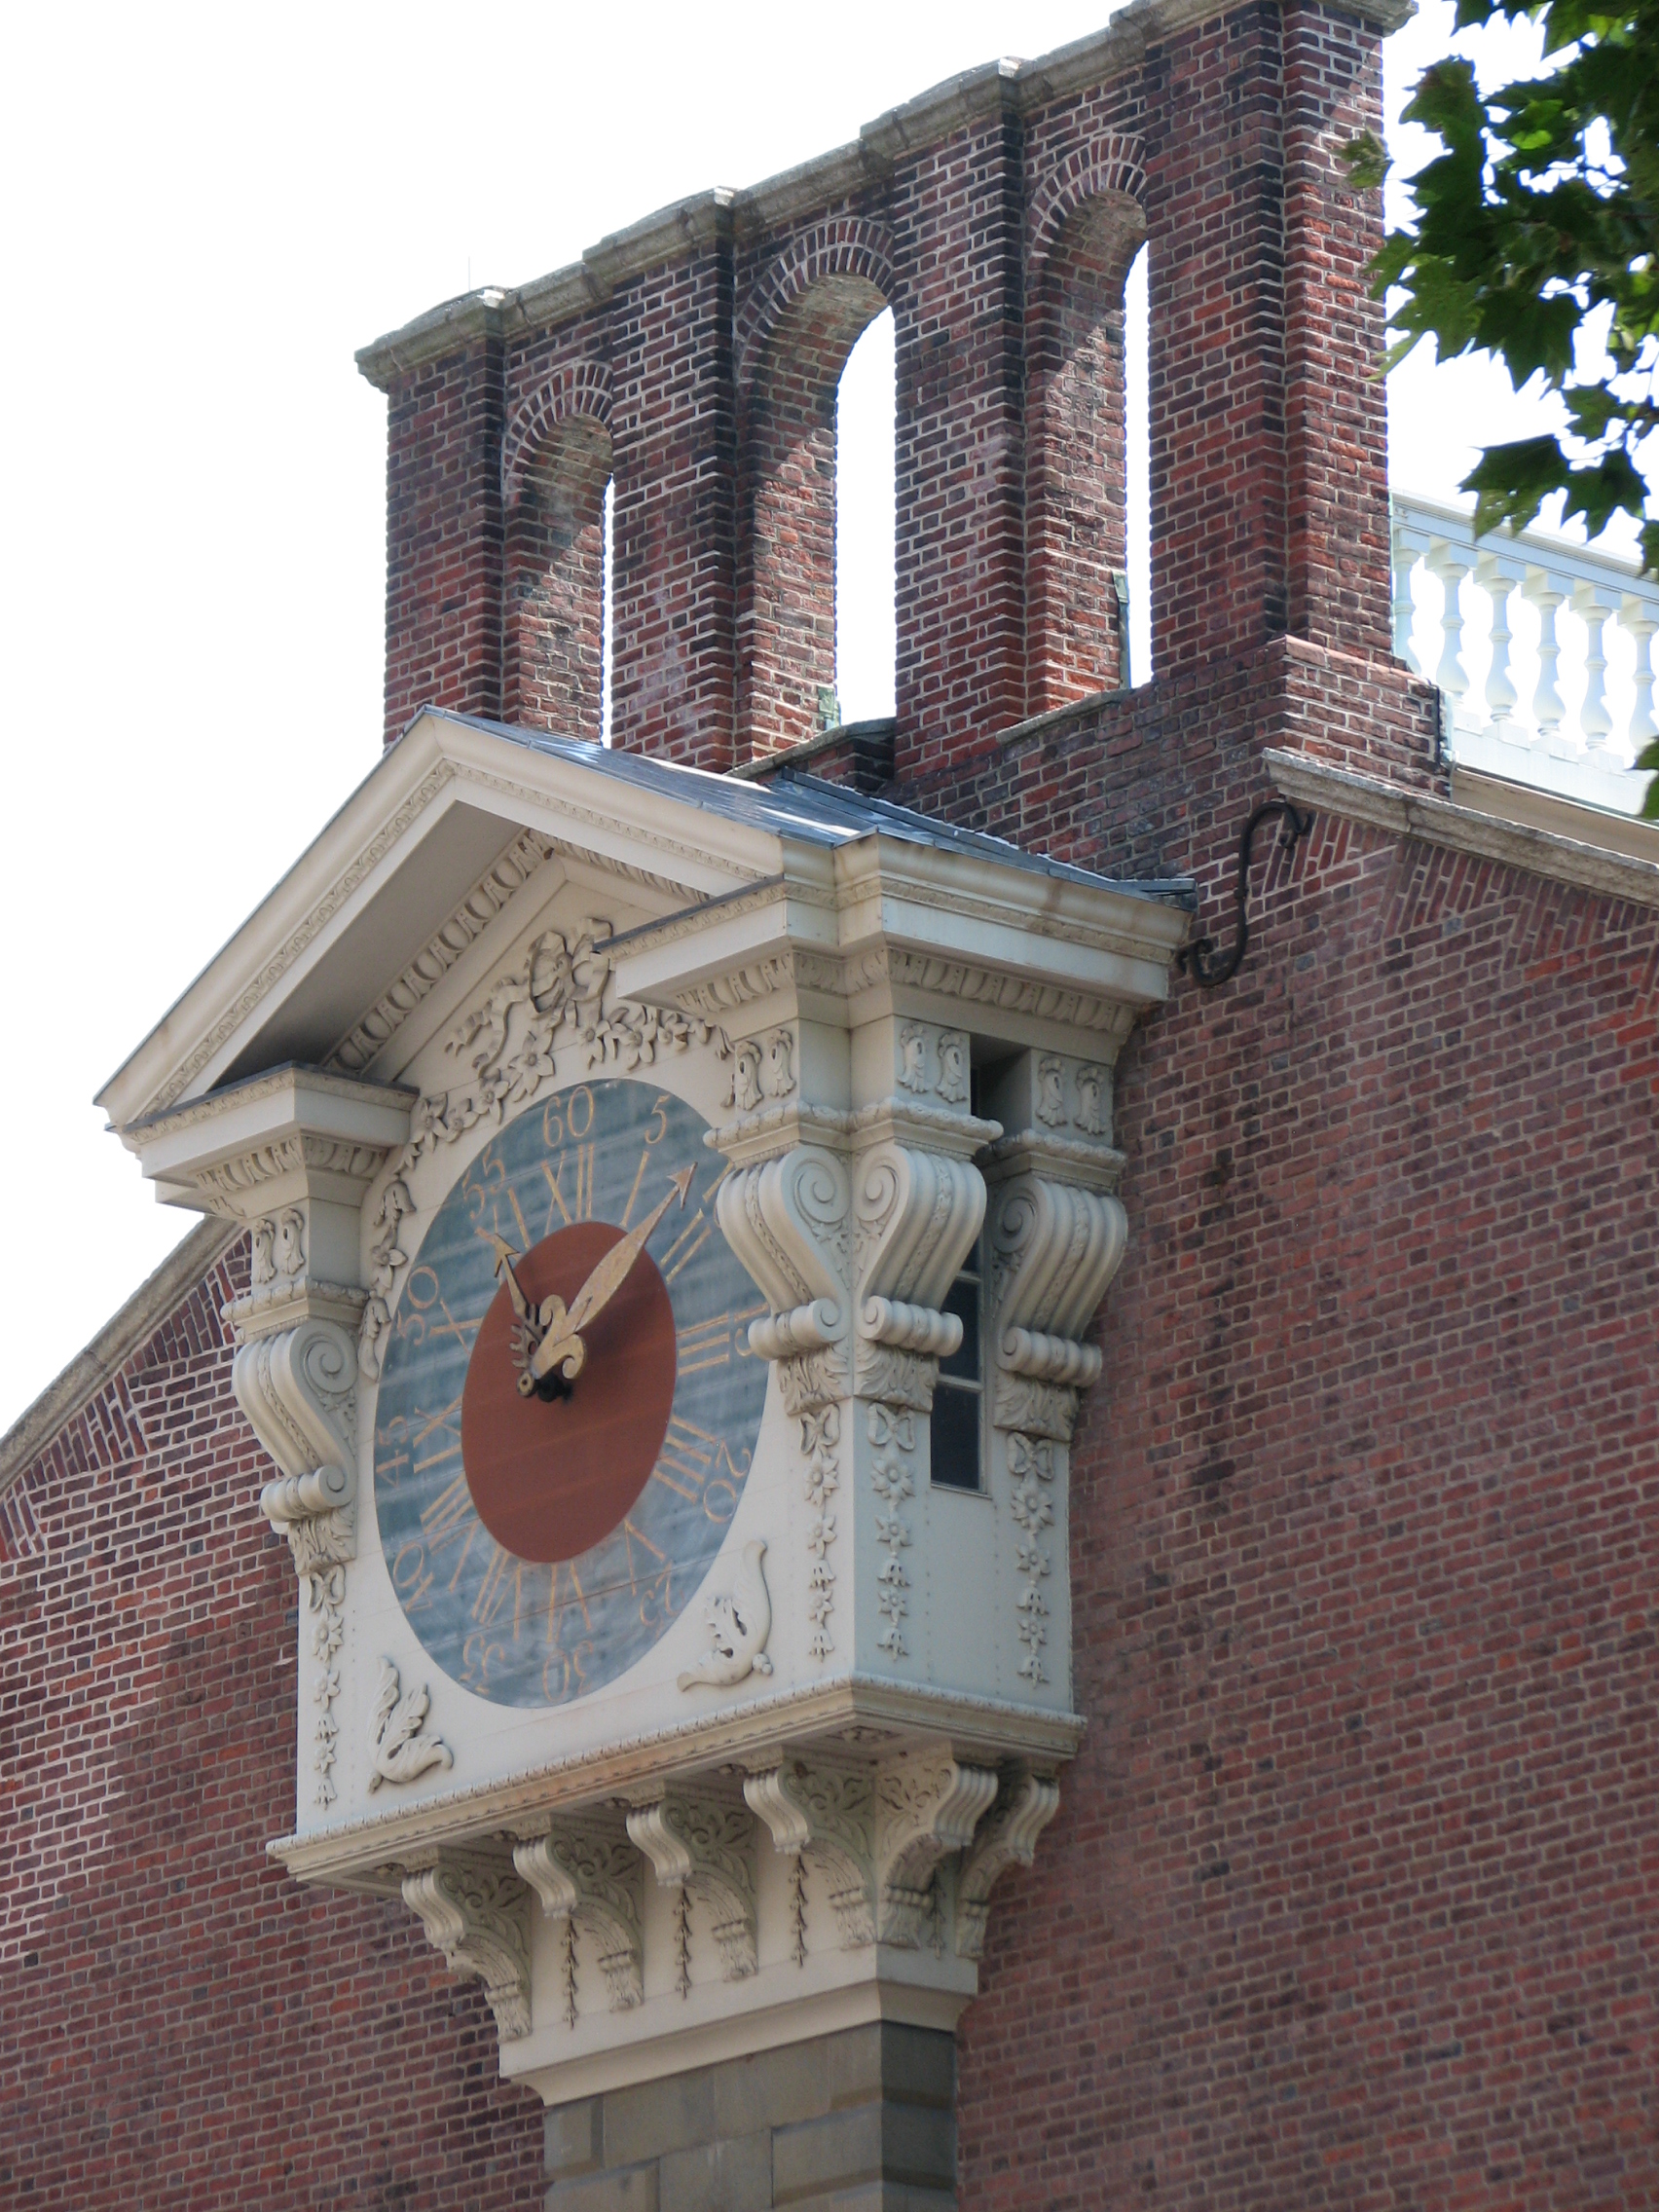 Master carpenter Edmund Wooley added the eight-day clock to the main building.